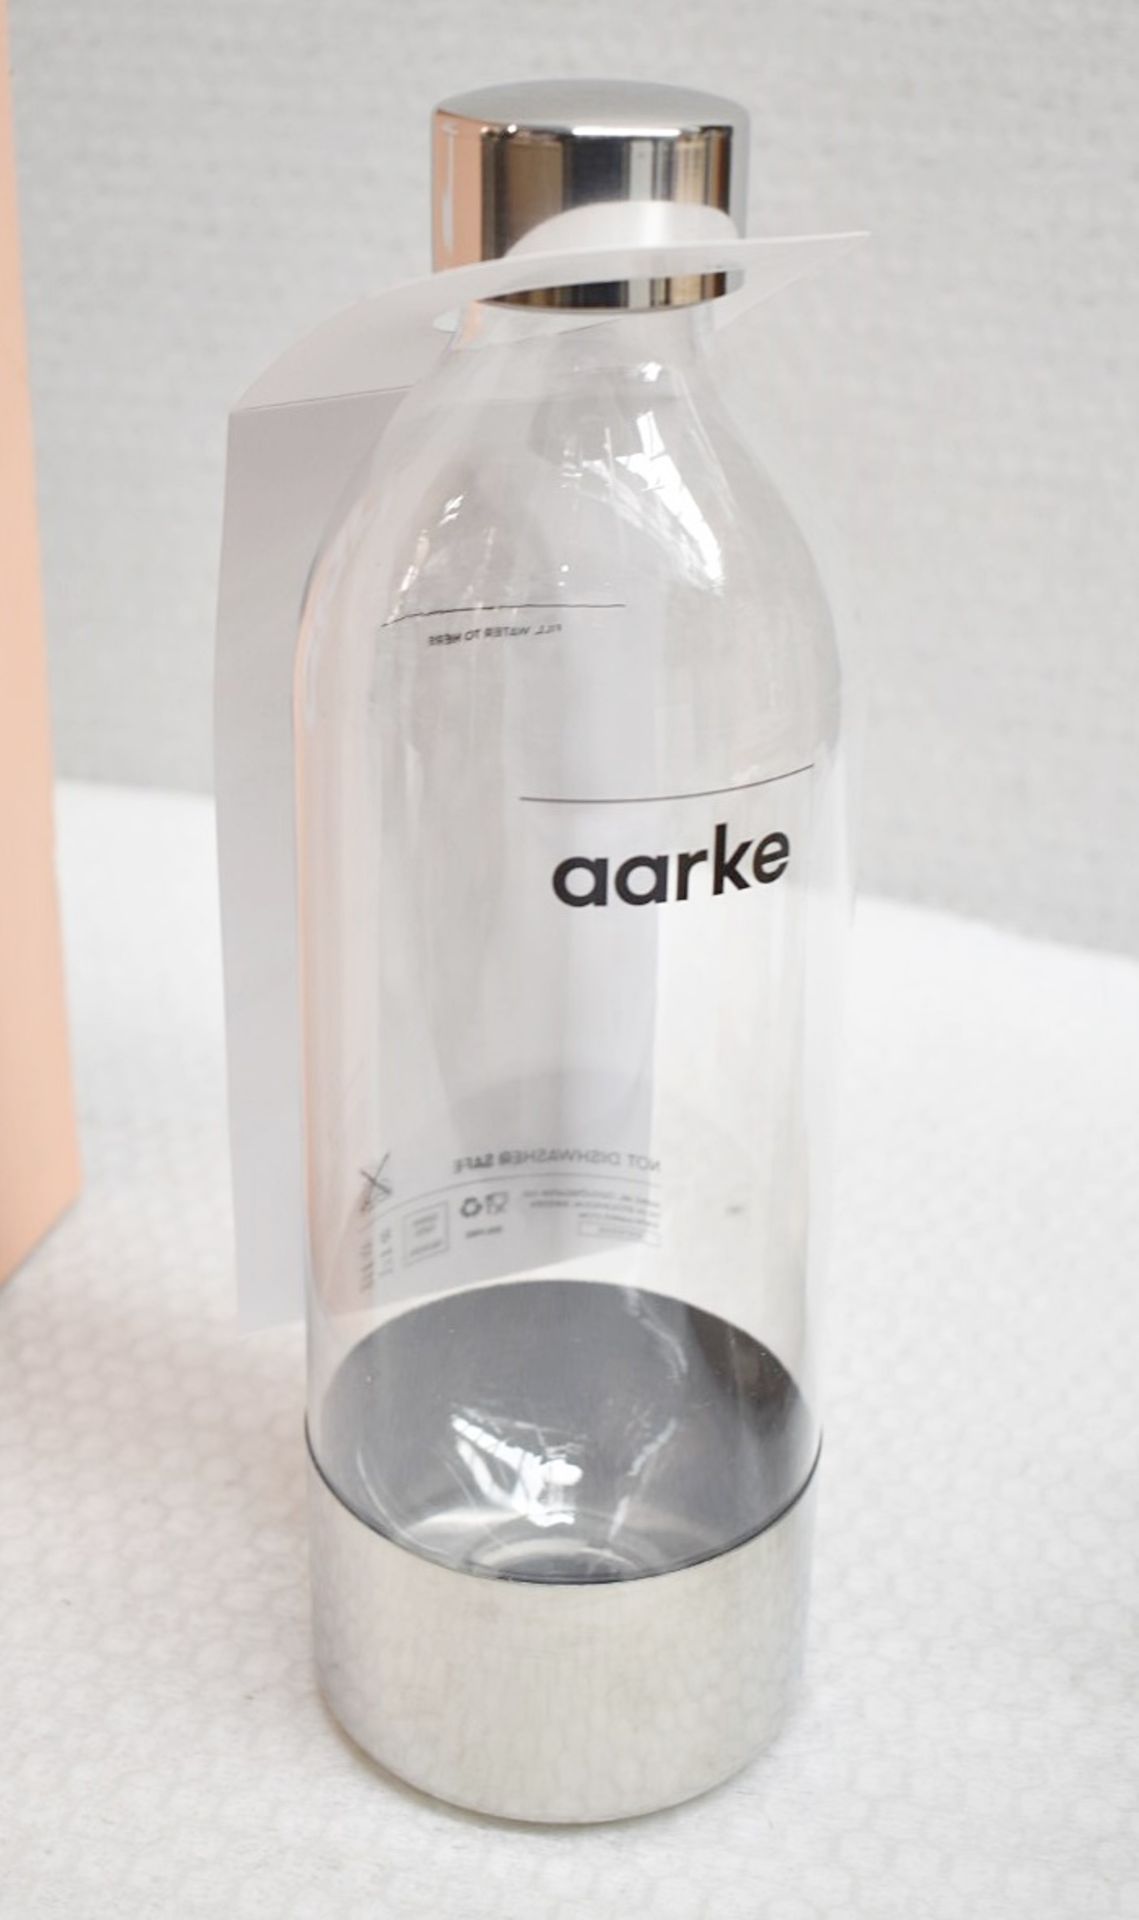 1 x AARKE Carbonator 3 With a Copper Finish - Original Price £179.00 - Unused Boxed Stock - Image 10 of 15